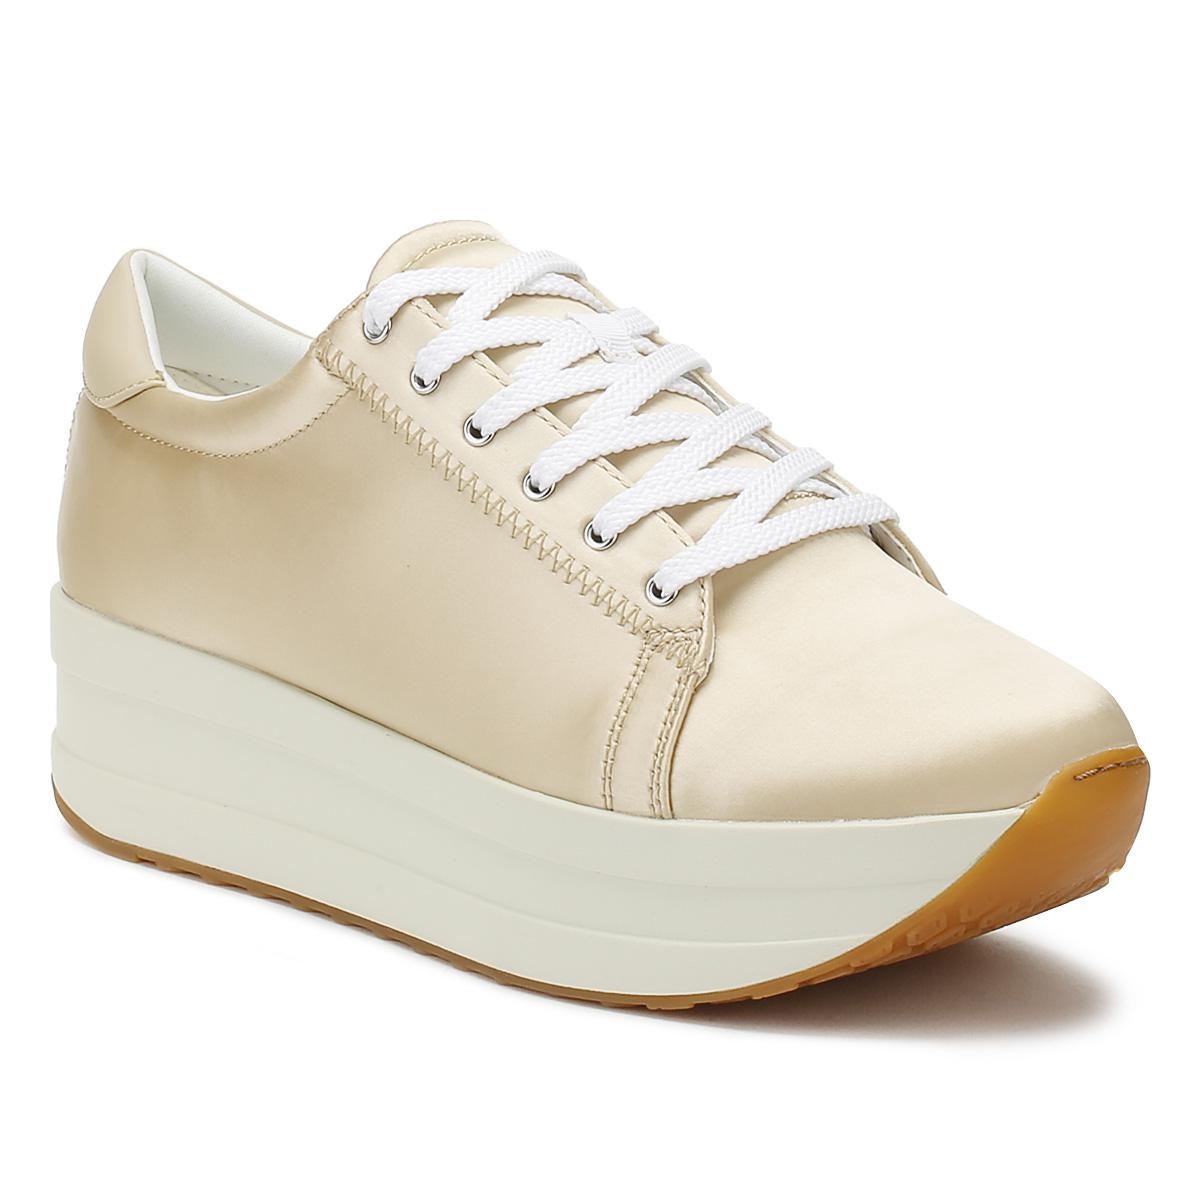 Vagabond Satin Womens Light Gold Casey Trainers Women's Shoes (trainers ...